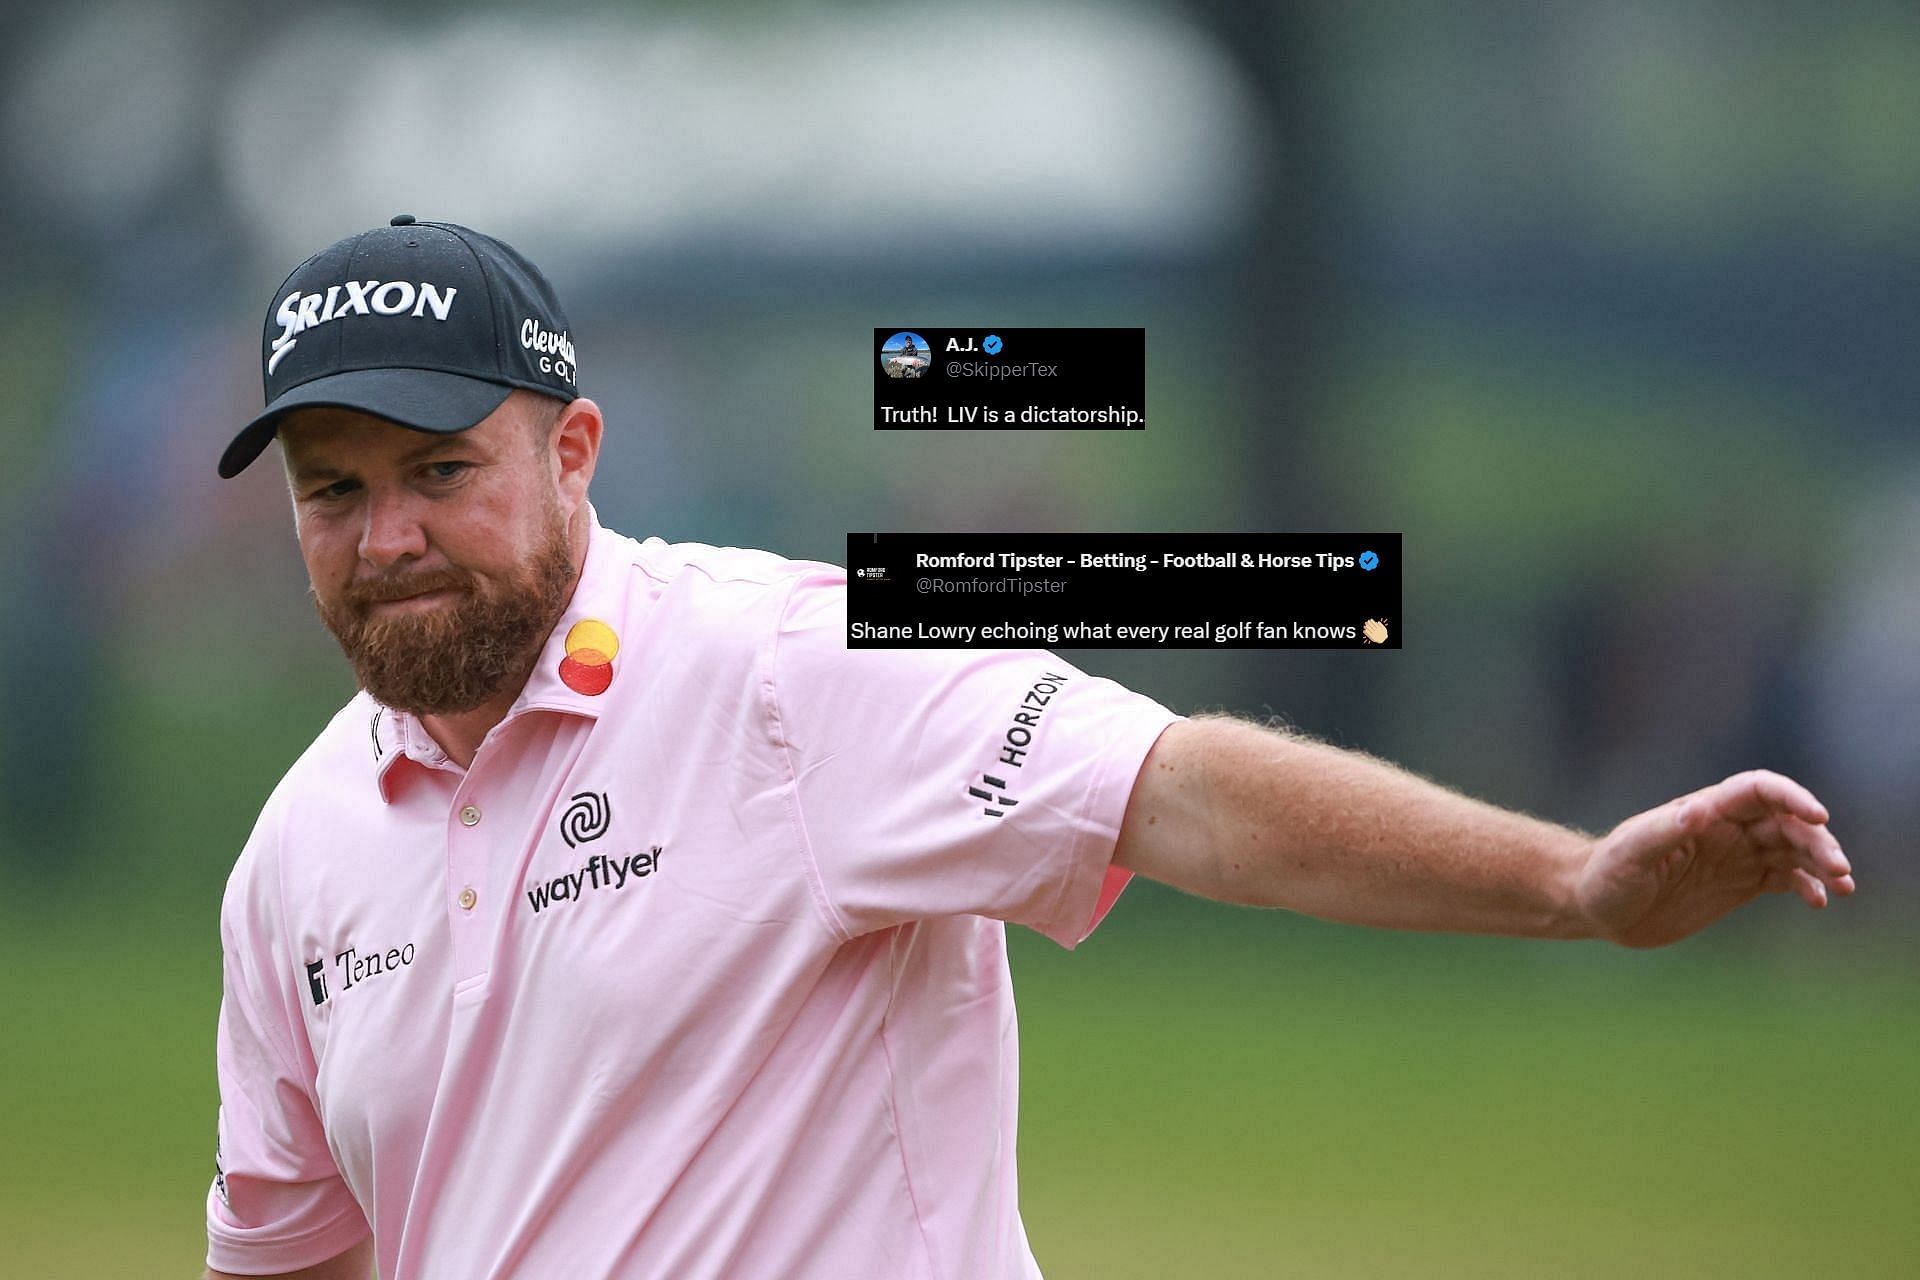 Shane Lowry criticizes LIV Golf and its members